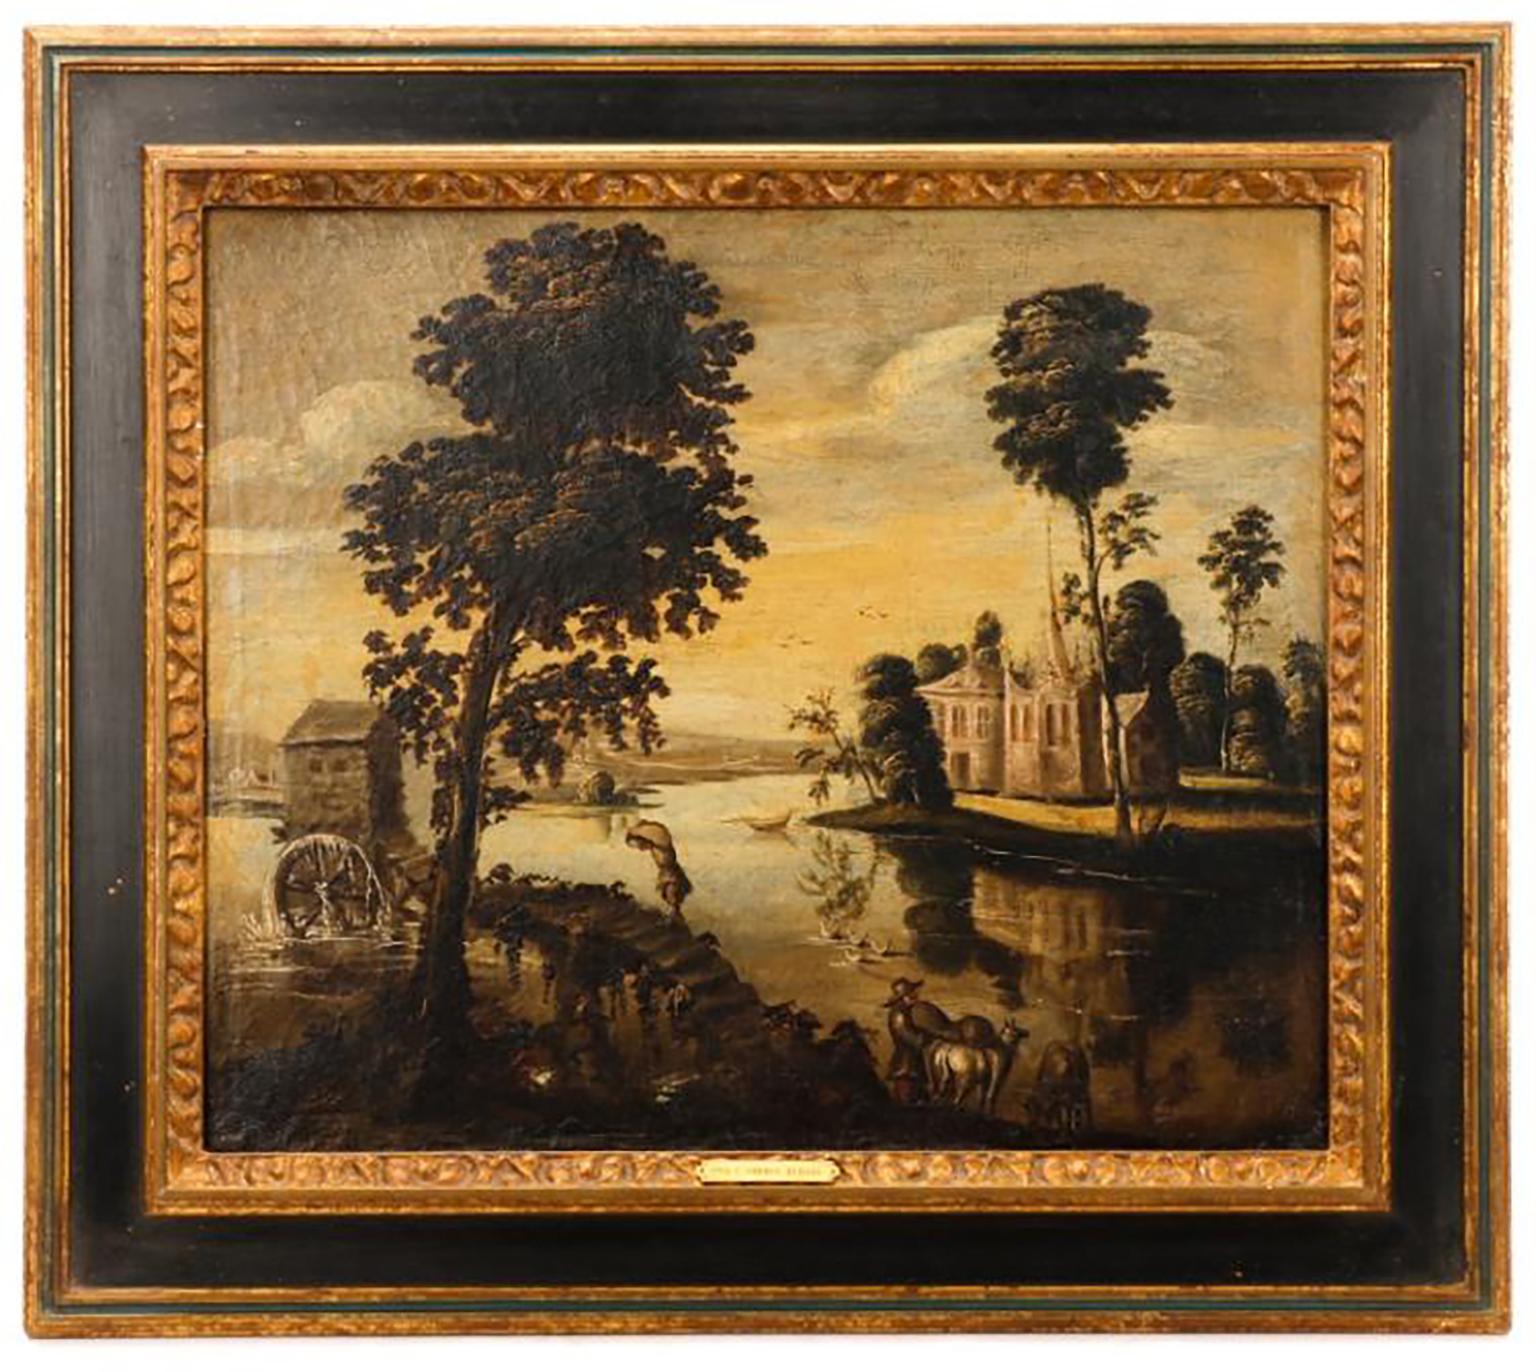 Unknown Landscape Painting - 18th Century Continental Riverside Mill Landscape Oil